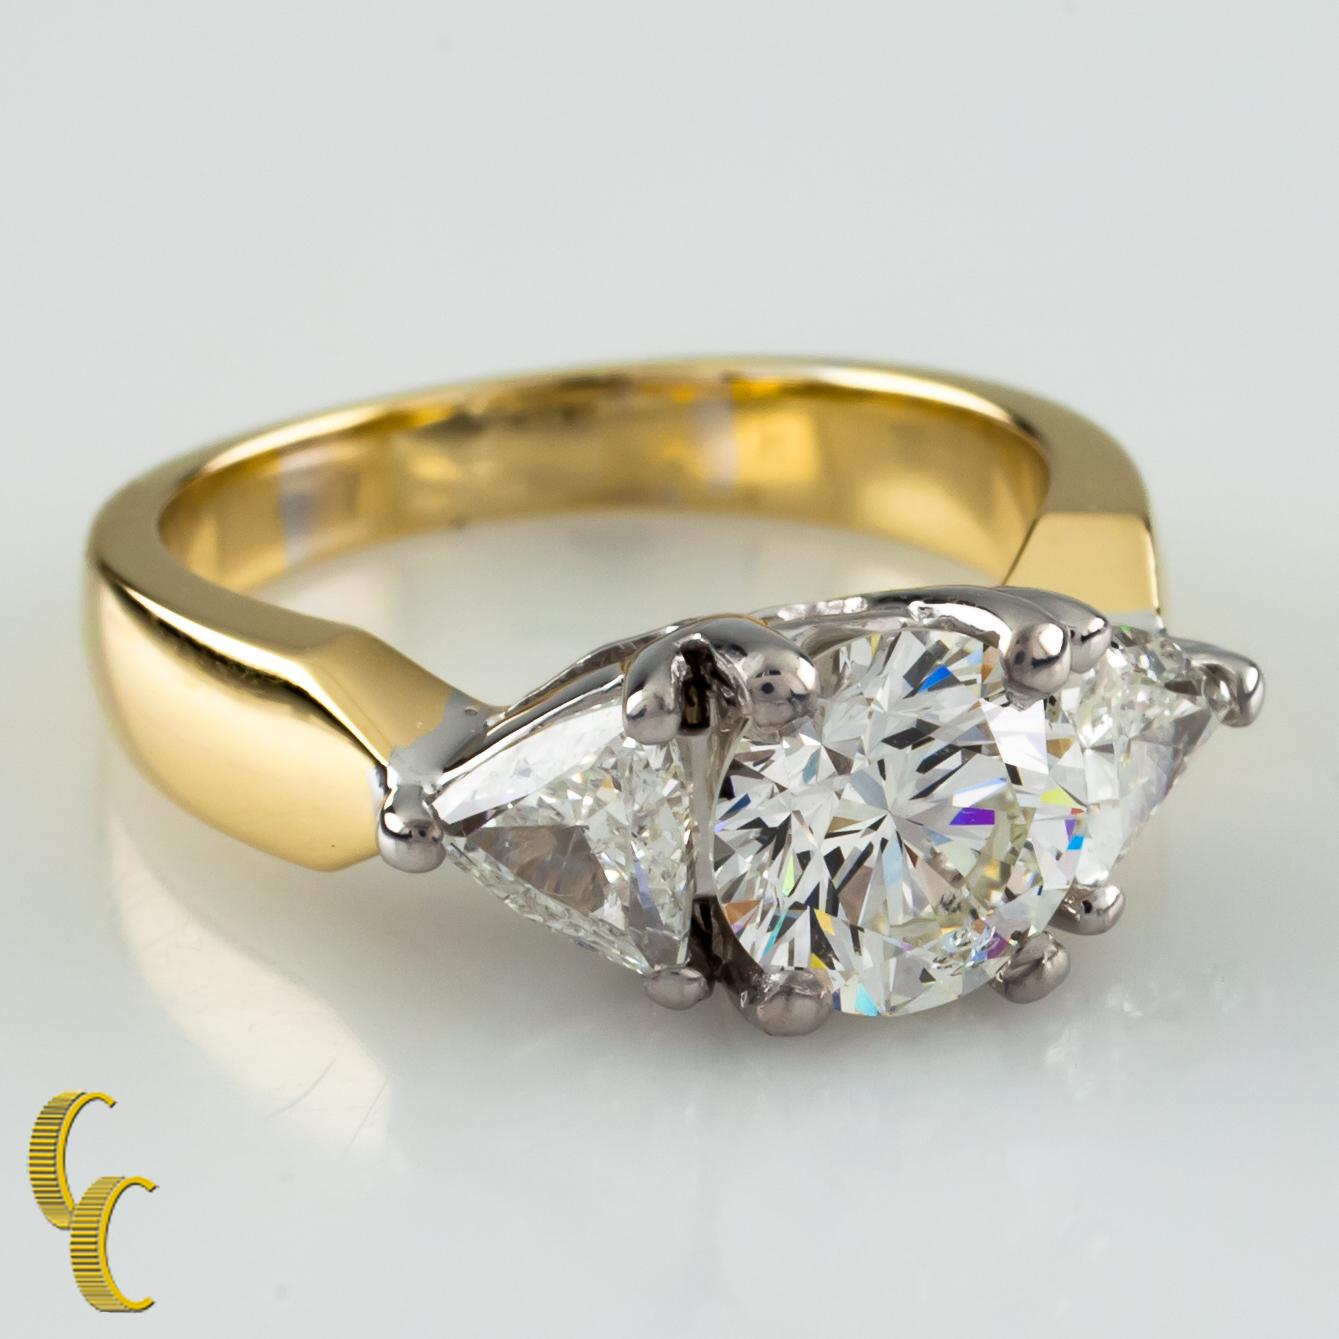 18k White & Yellow Gold
Featuring One Round Brilliant Diamond And Two Trillion Cut Diamonds
Total Diamond Weight: Approximately 1.91 Cts (Round Approximately : 1.21 Cts, Two Trillion Approximately: 0.7 Cts)
Average Color: I
Average Clarity: SI1 